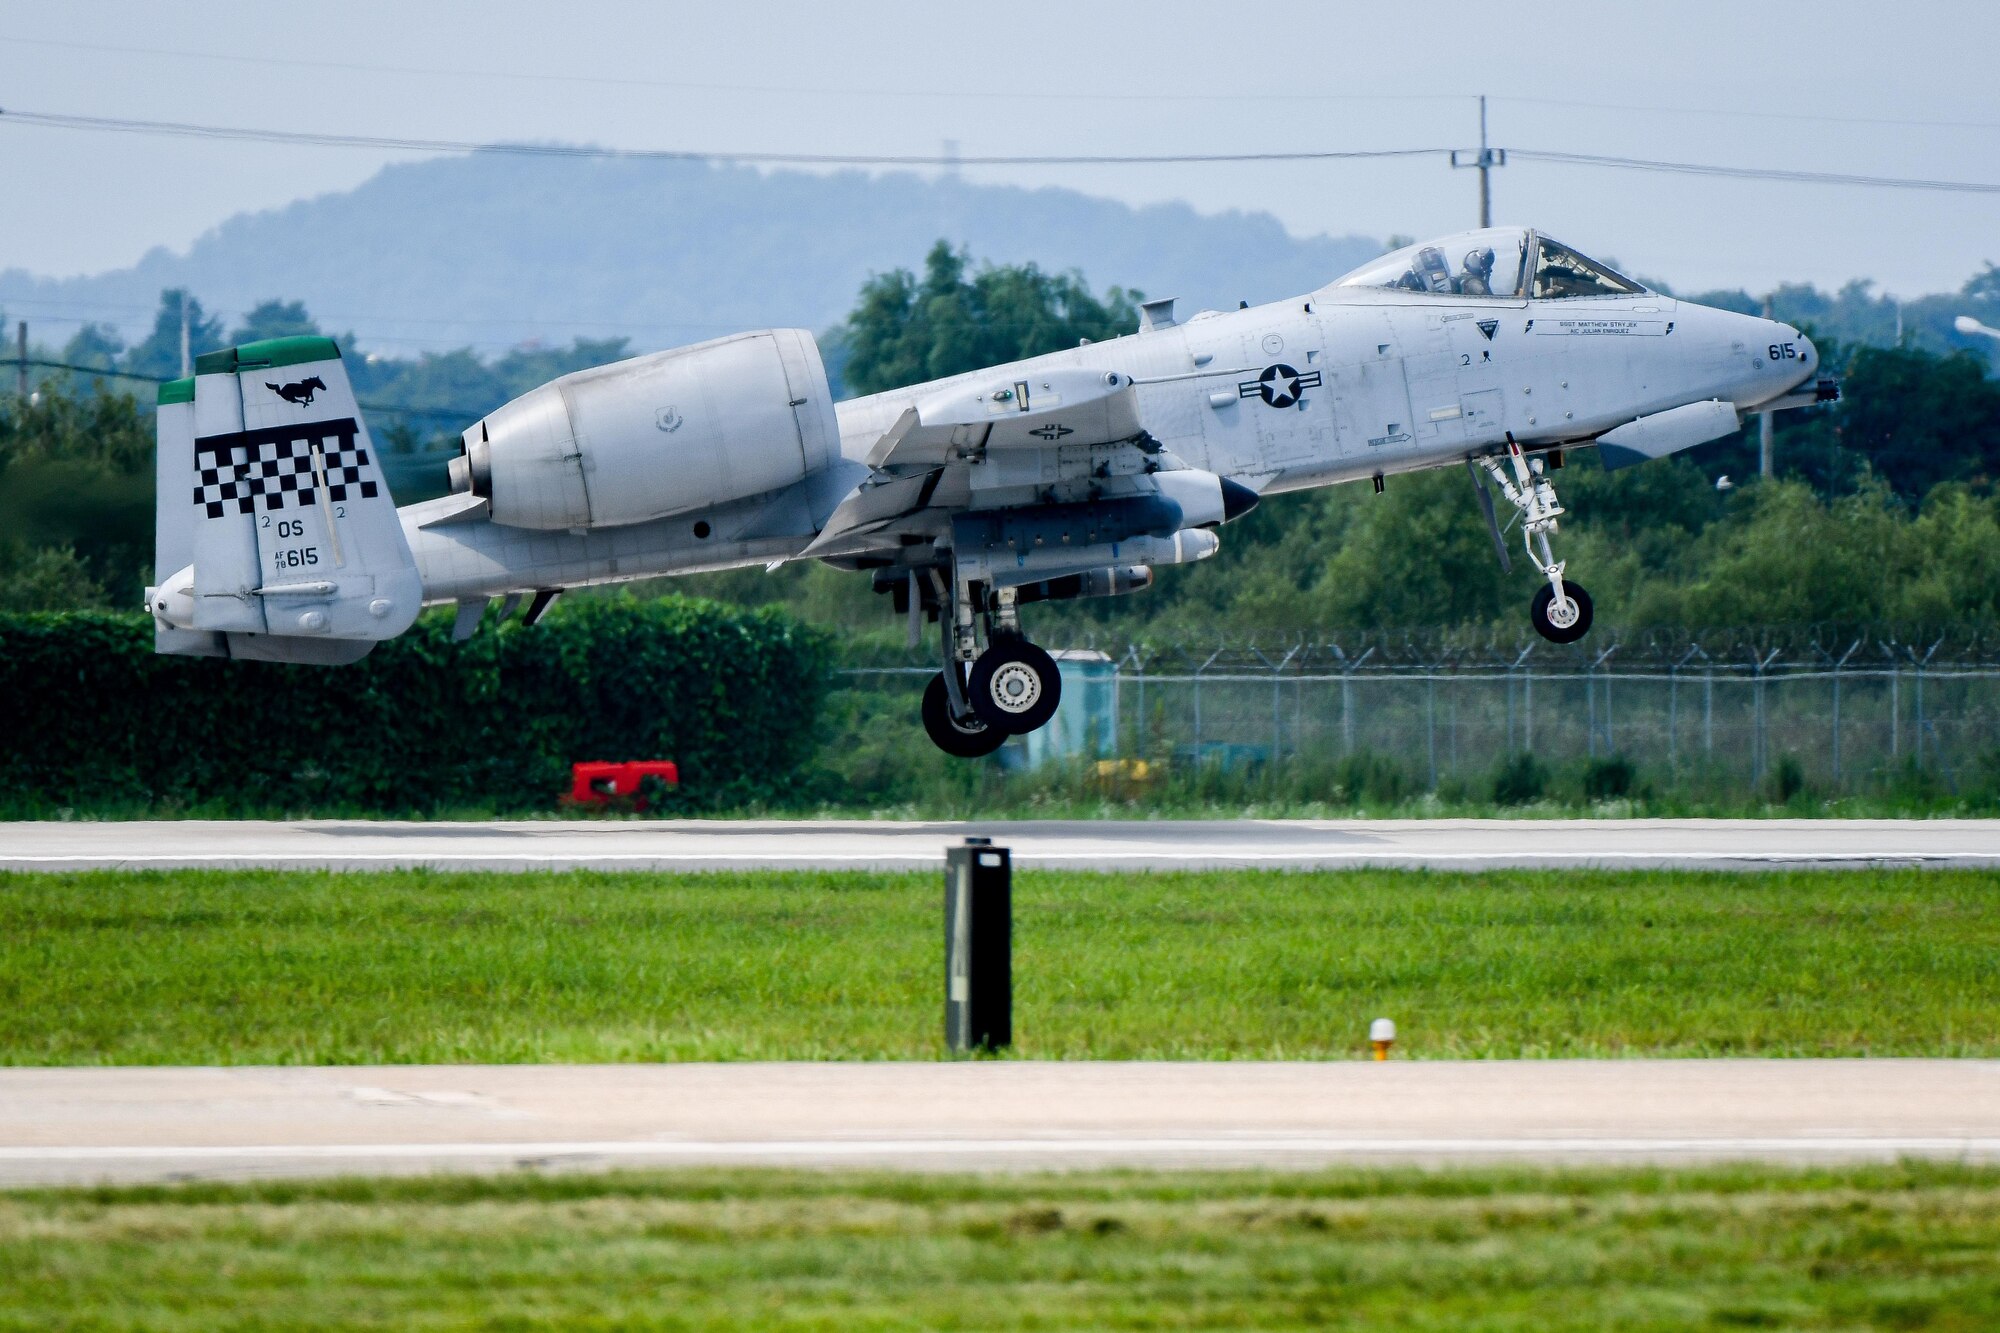 An A-10 Thunderbolt II assigned to the 25th Fighter Squadron lifts off from Osan Air Base, Republic of Korea, July 19, 2016. The A-10 was en-route to a combat search and rescue scenario during Exercise Pacific Thunder 16-2, a combined exercise to enhance interoperability between U.S. and ROK forces. (U.S. Air Force photo by Staff Sgt. Jonathan Steffen/Released)